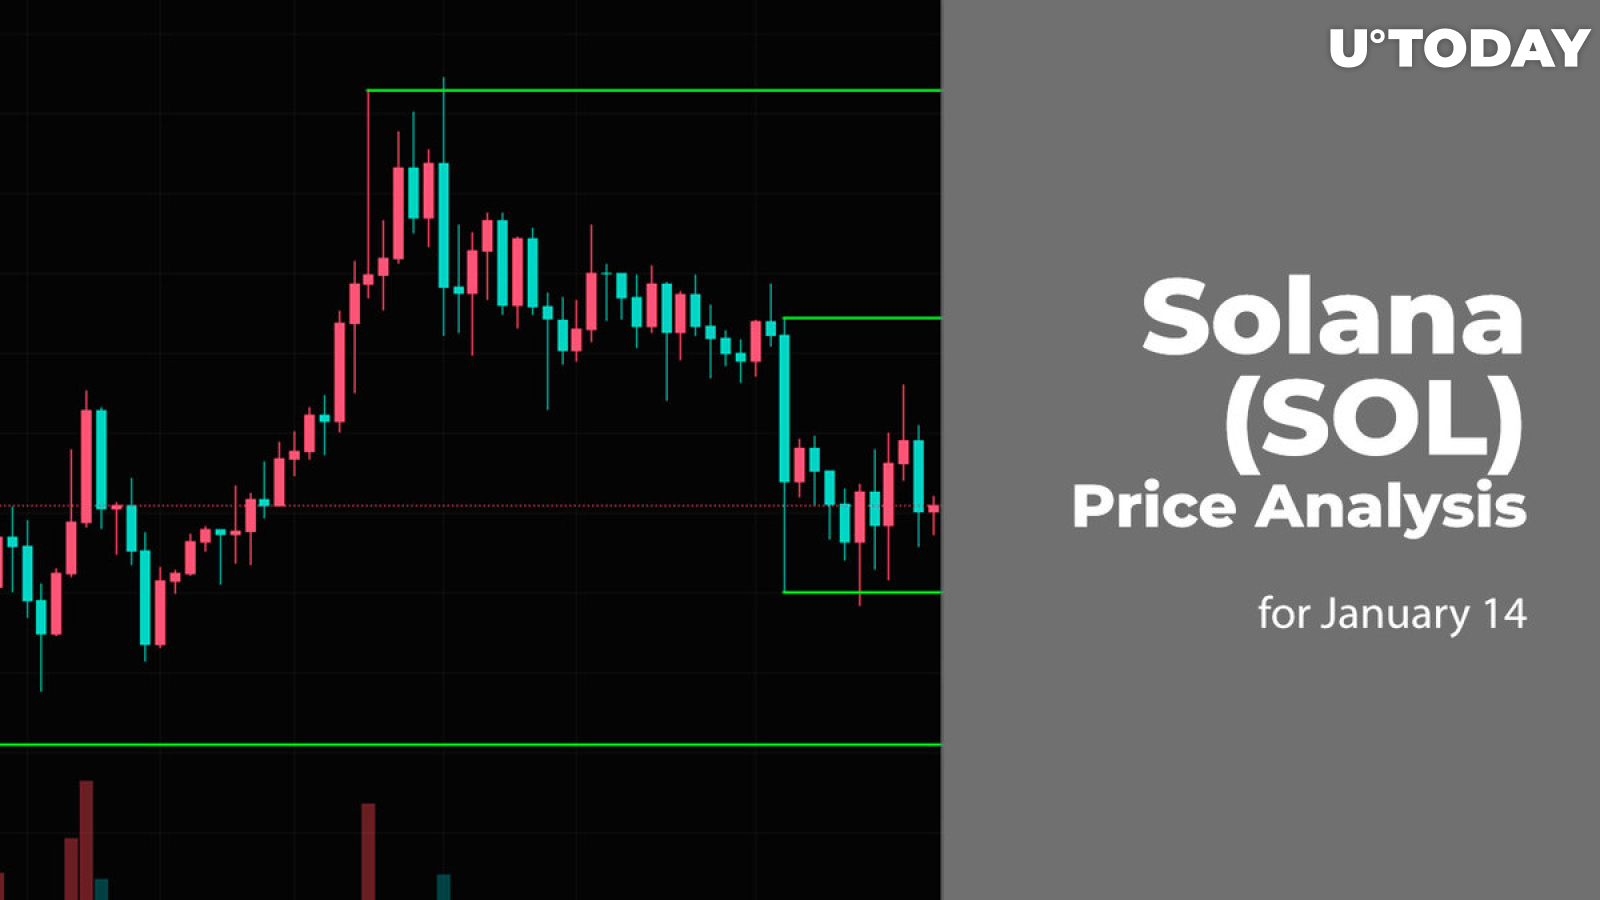 Solana (SOL) Price Analysis for January 14